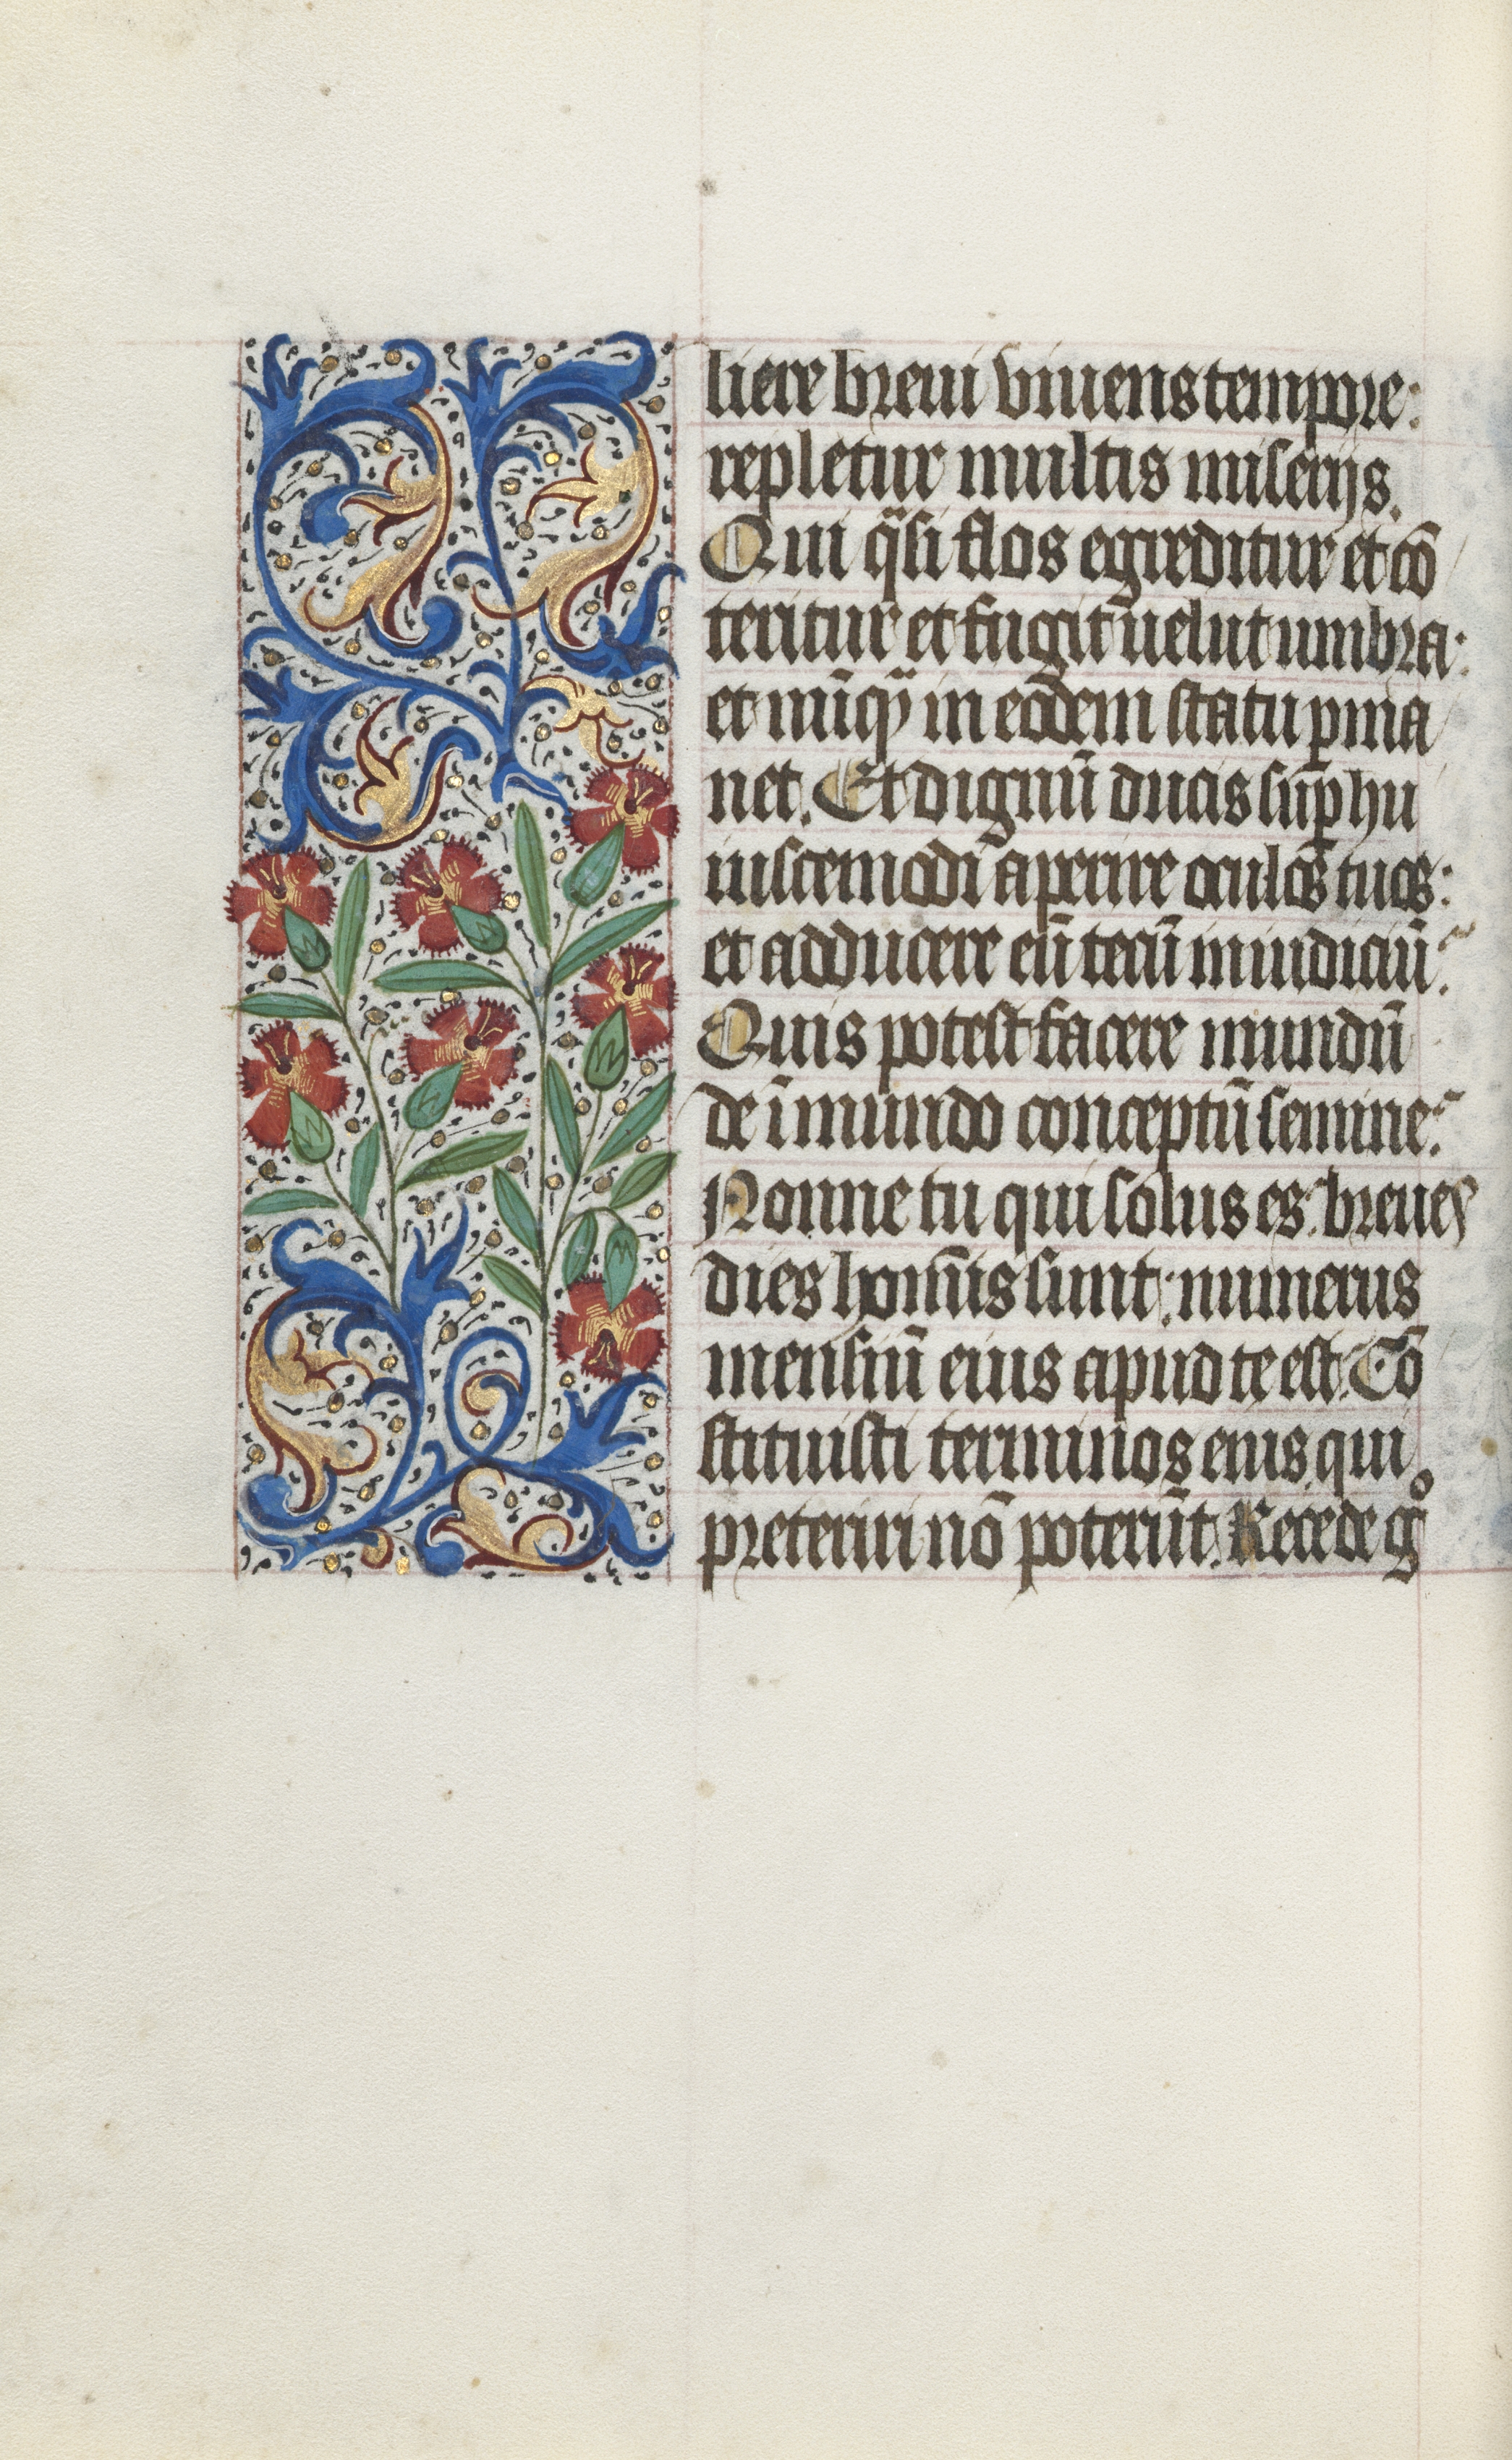 Book of Hours (Use of Rouen): fol. 123v